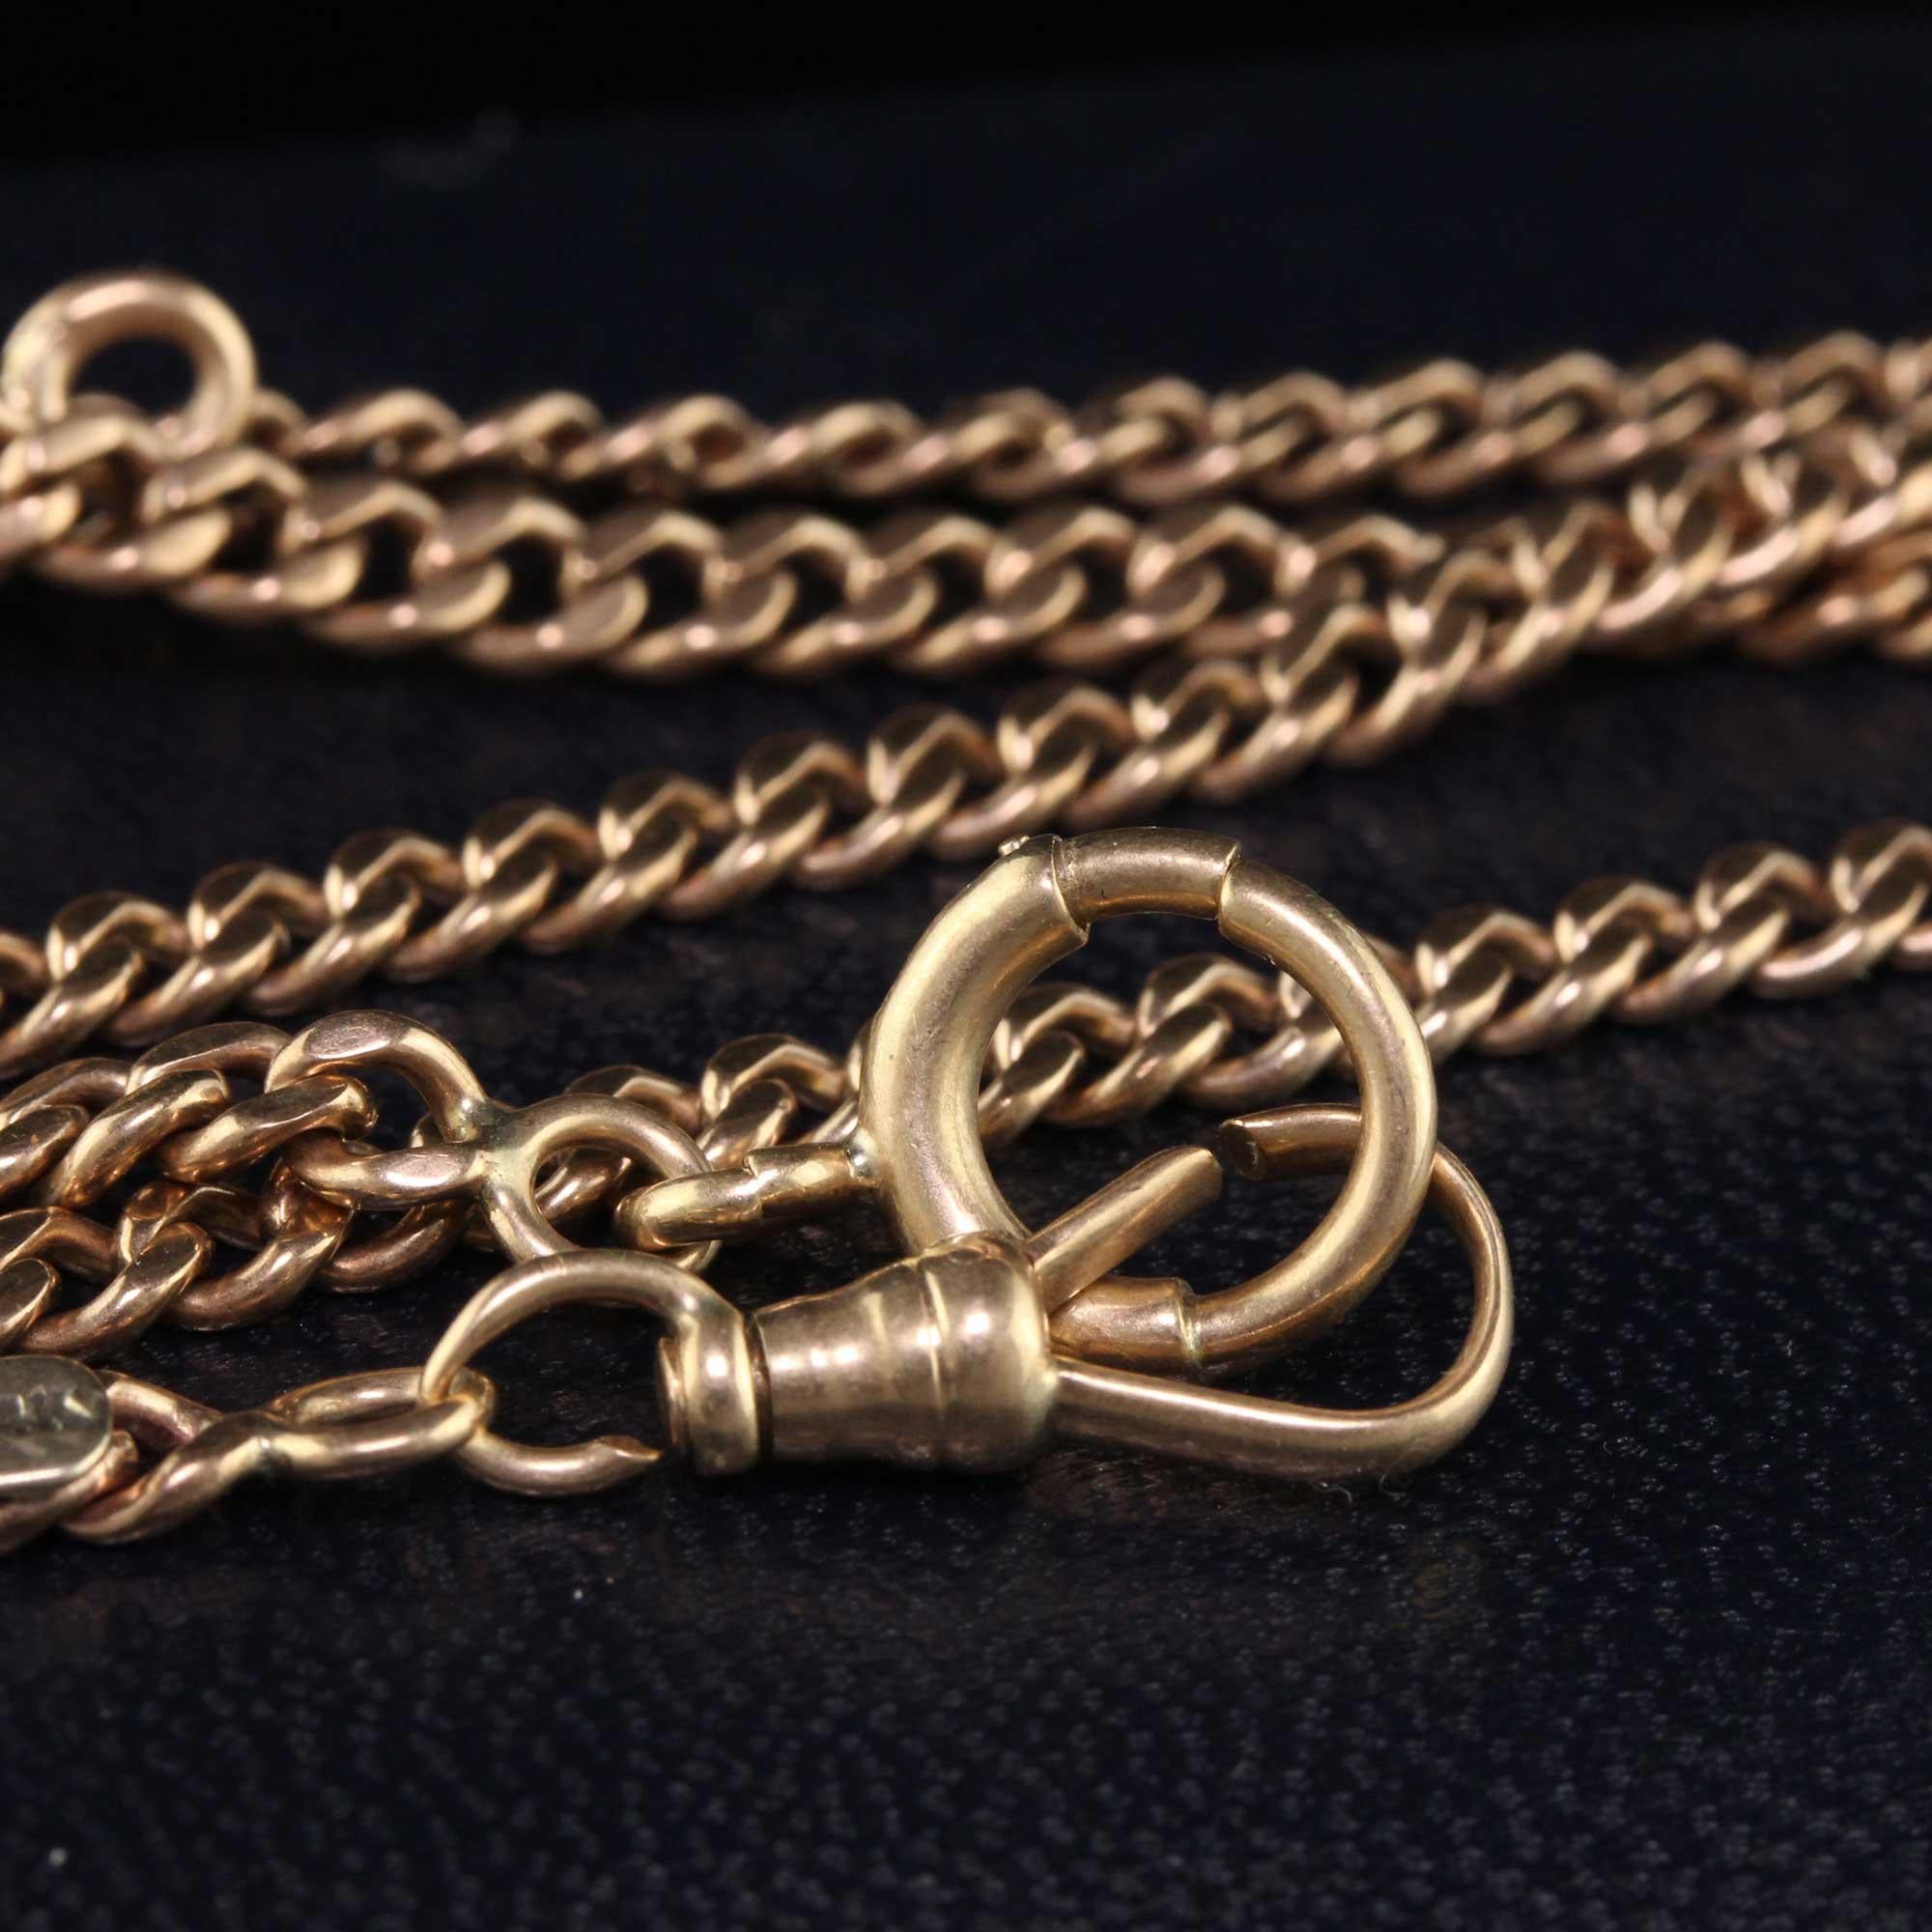 Women's Antique Art Deco 14K Rose Gold Curb Link T Link Chain - 17 inches